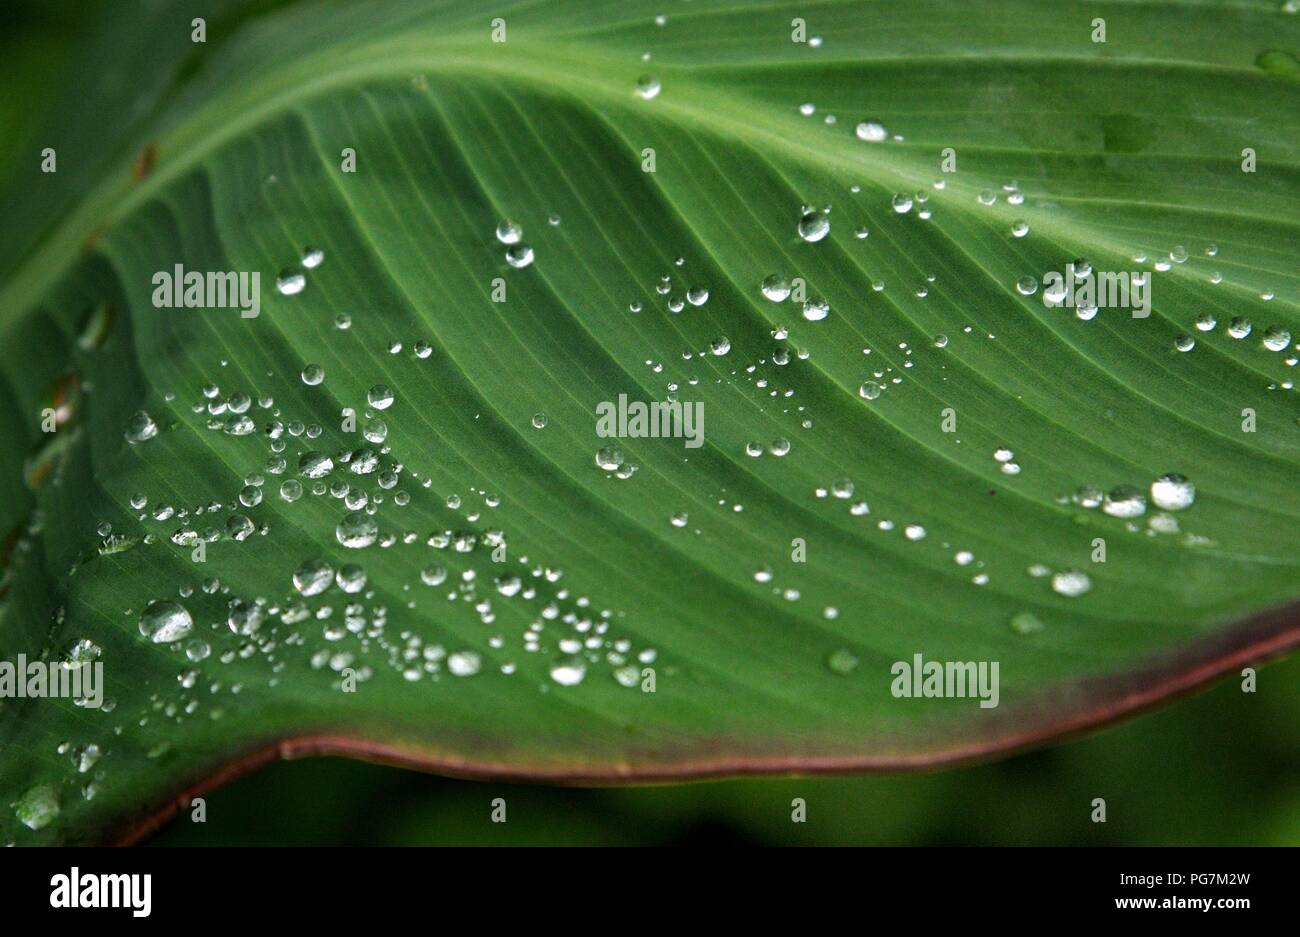 The dew on the green leaf of an unknown plant. Stock Photo